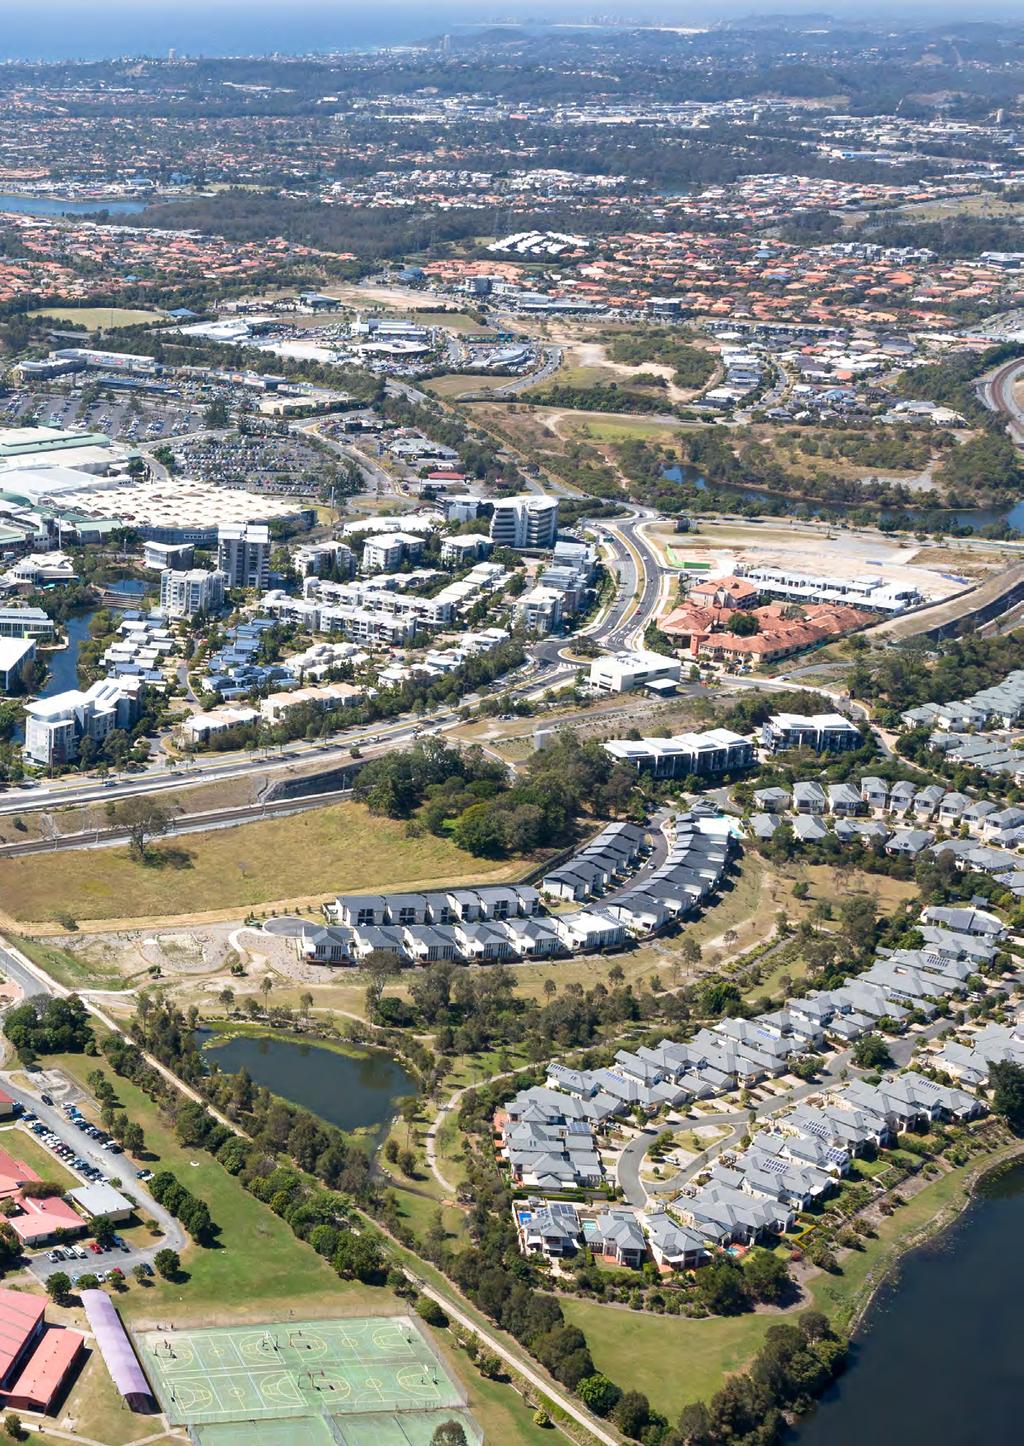 BUNDALL is a precinct undergoing transition, with stock levels declining as some supply is withdrawn for owner-occupation (by Gold Coast City Council), refurbishment or for redevelopment into other